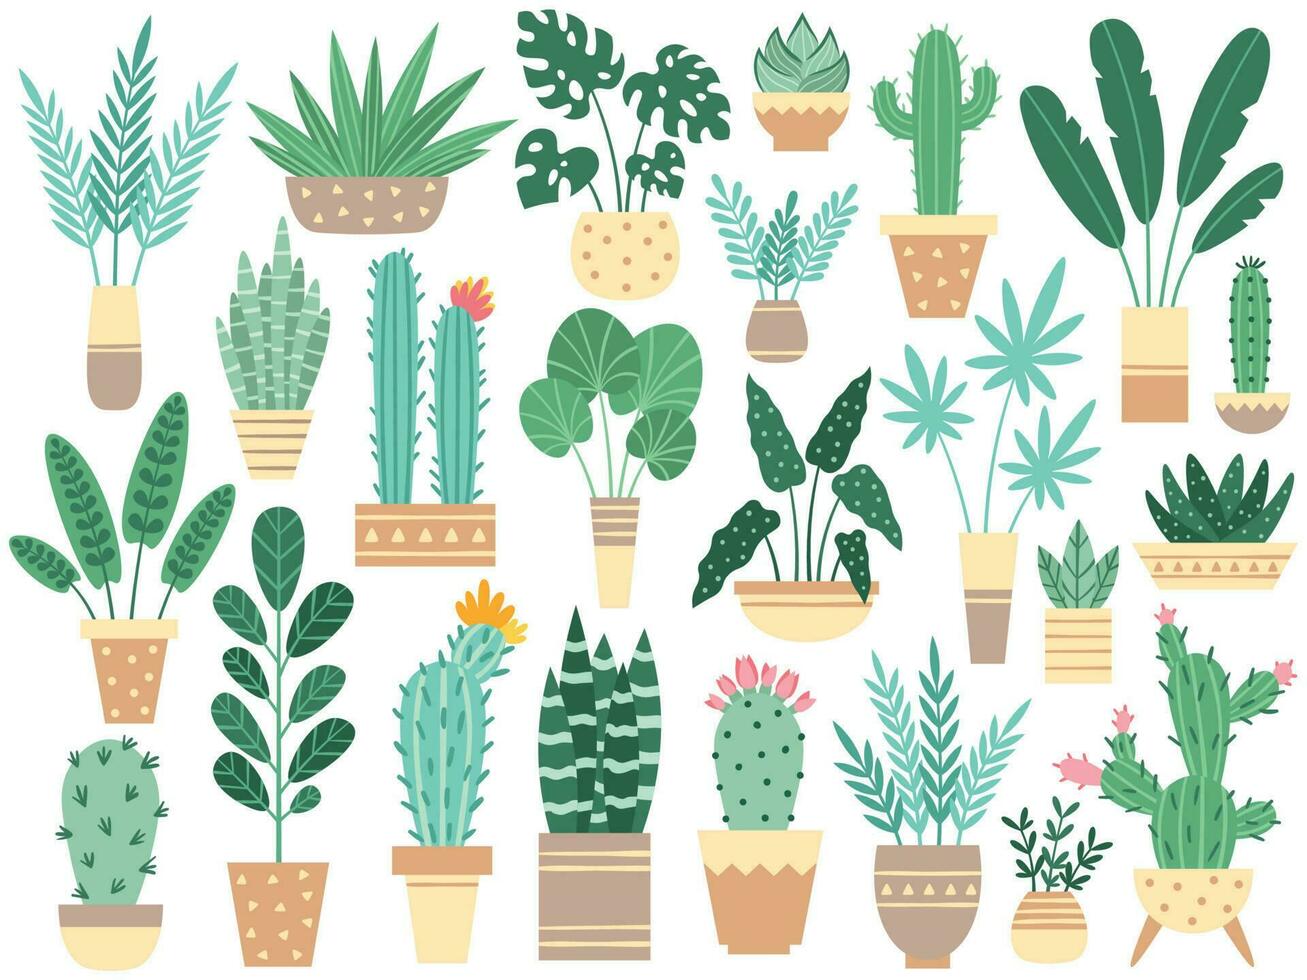 Home plants in pots. Nature houseplants, decoration potted houseplant and flower plant planting in pot vector isolated illustration